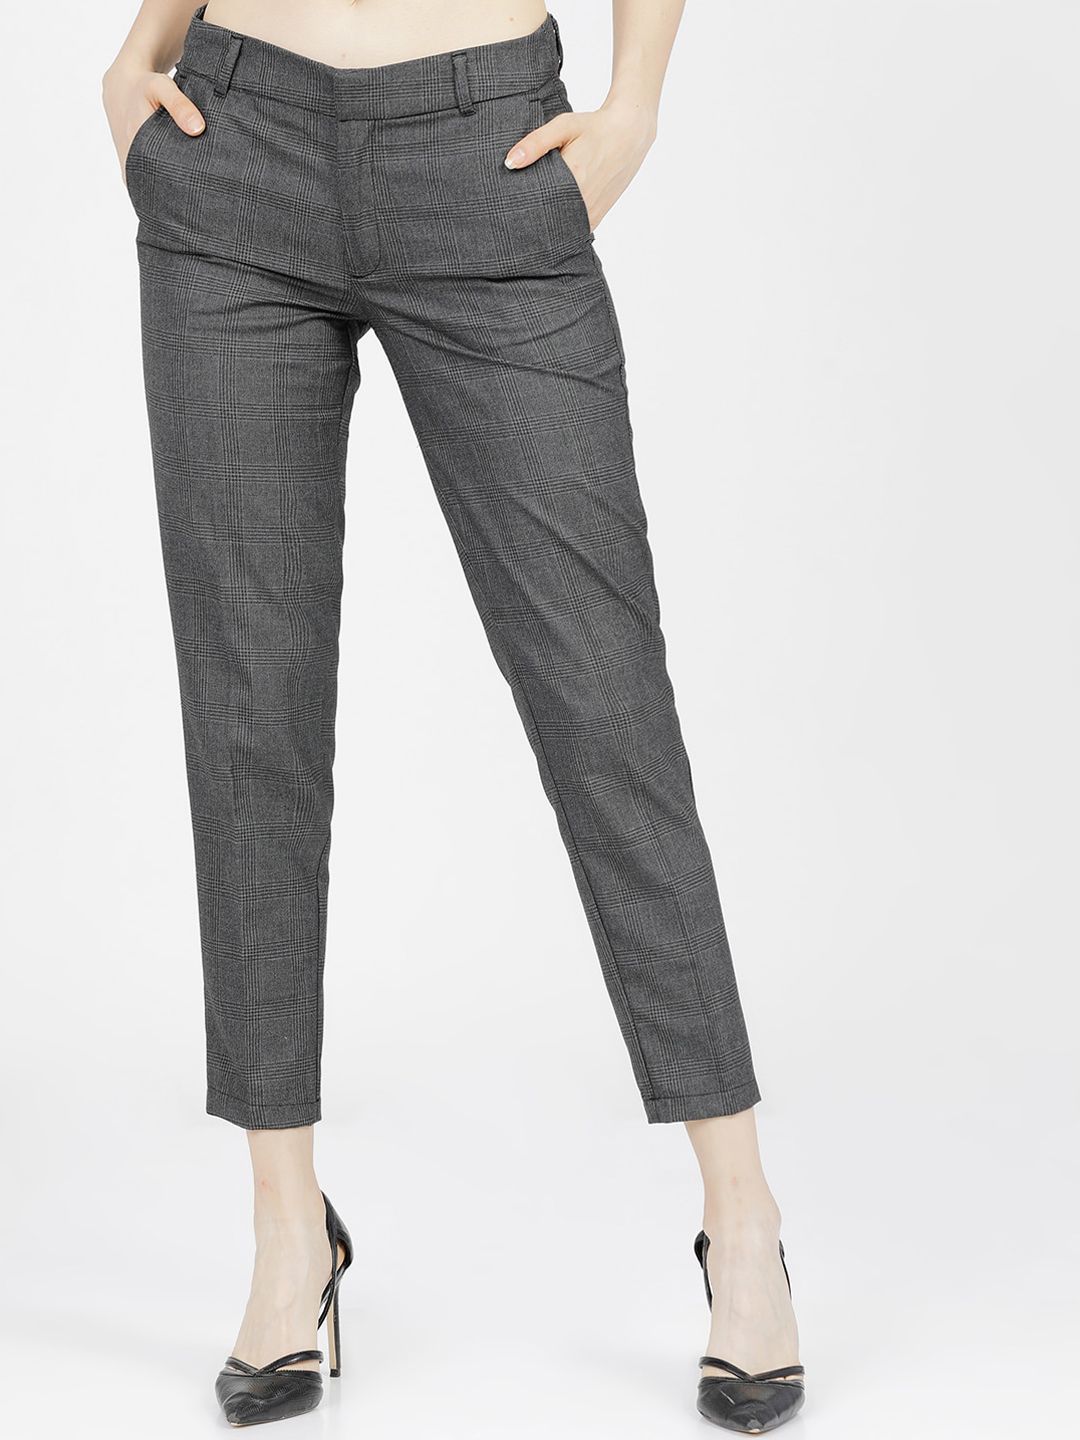 Tokyo Talkies Women Grey Checked Formal Trousers Price in India